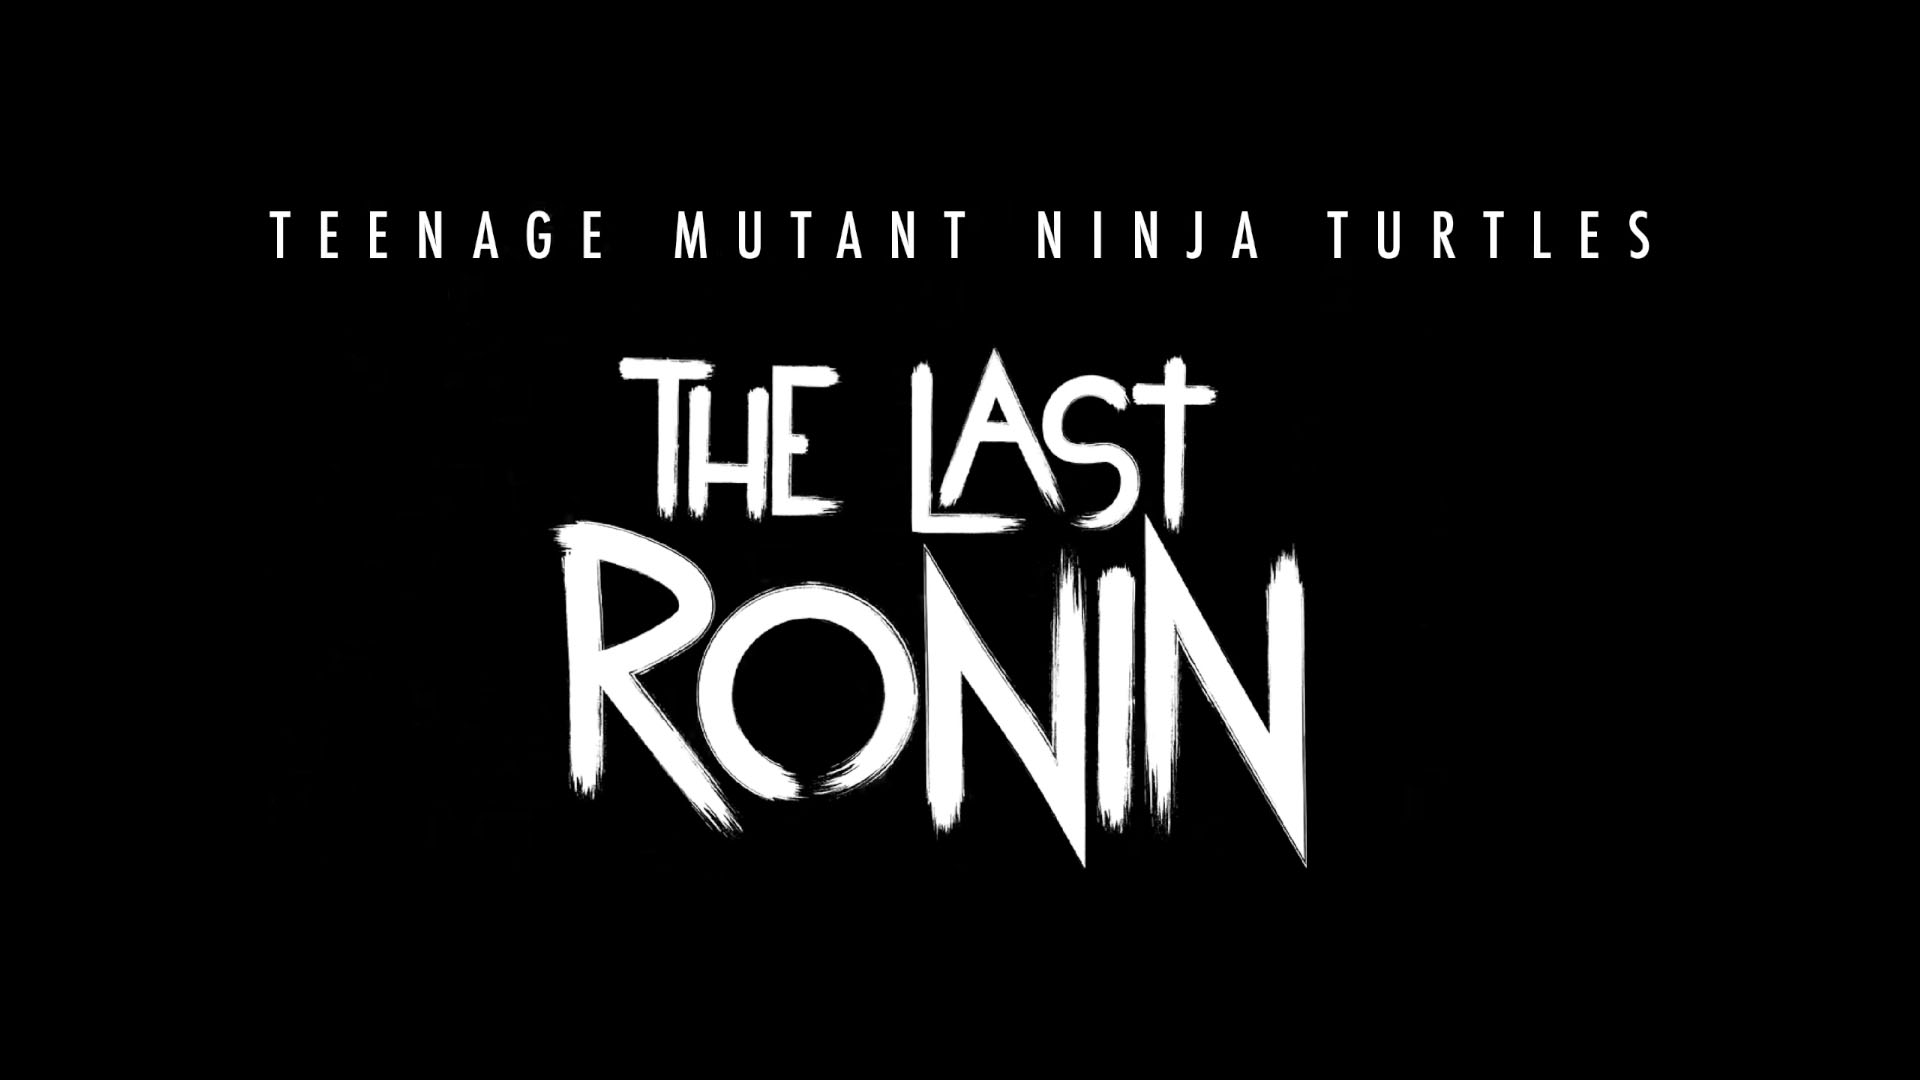 TMNT graphic novel The Last Ronin is becoming a video game - Polygon